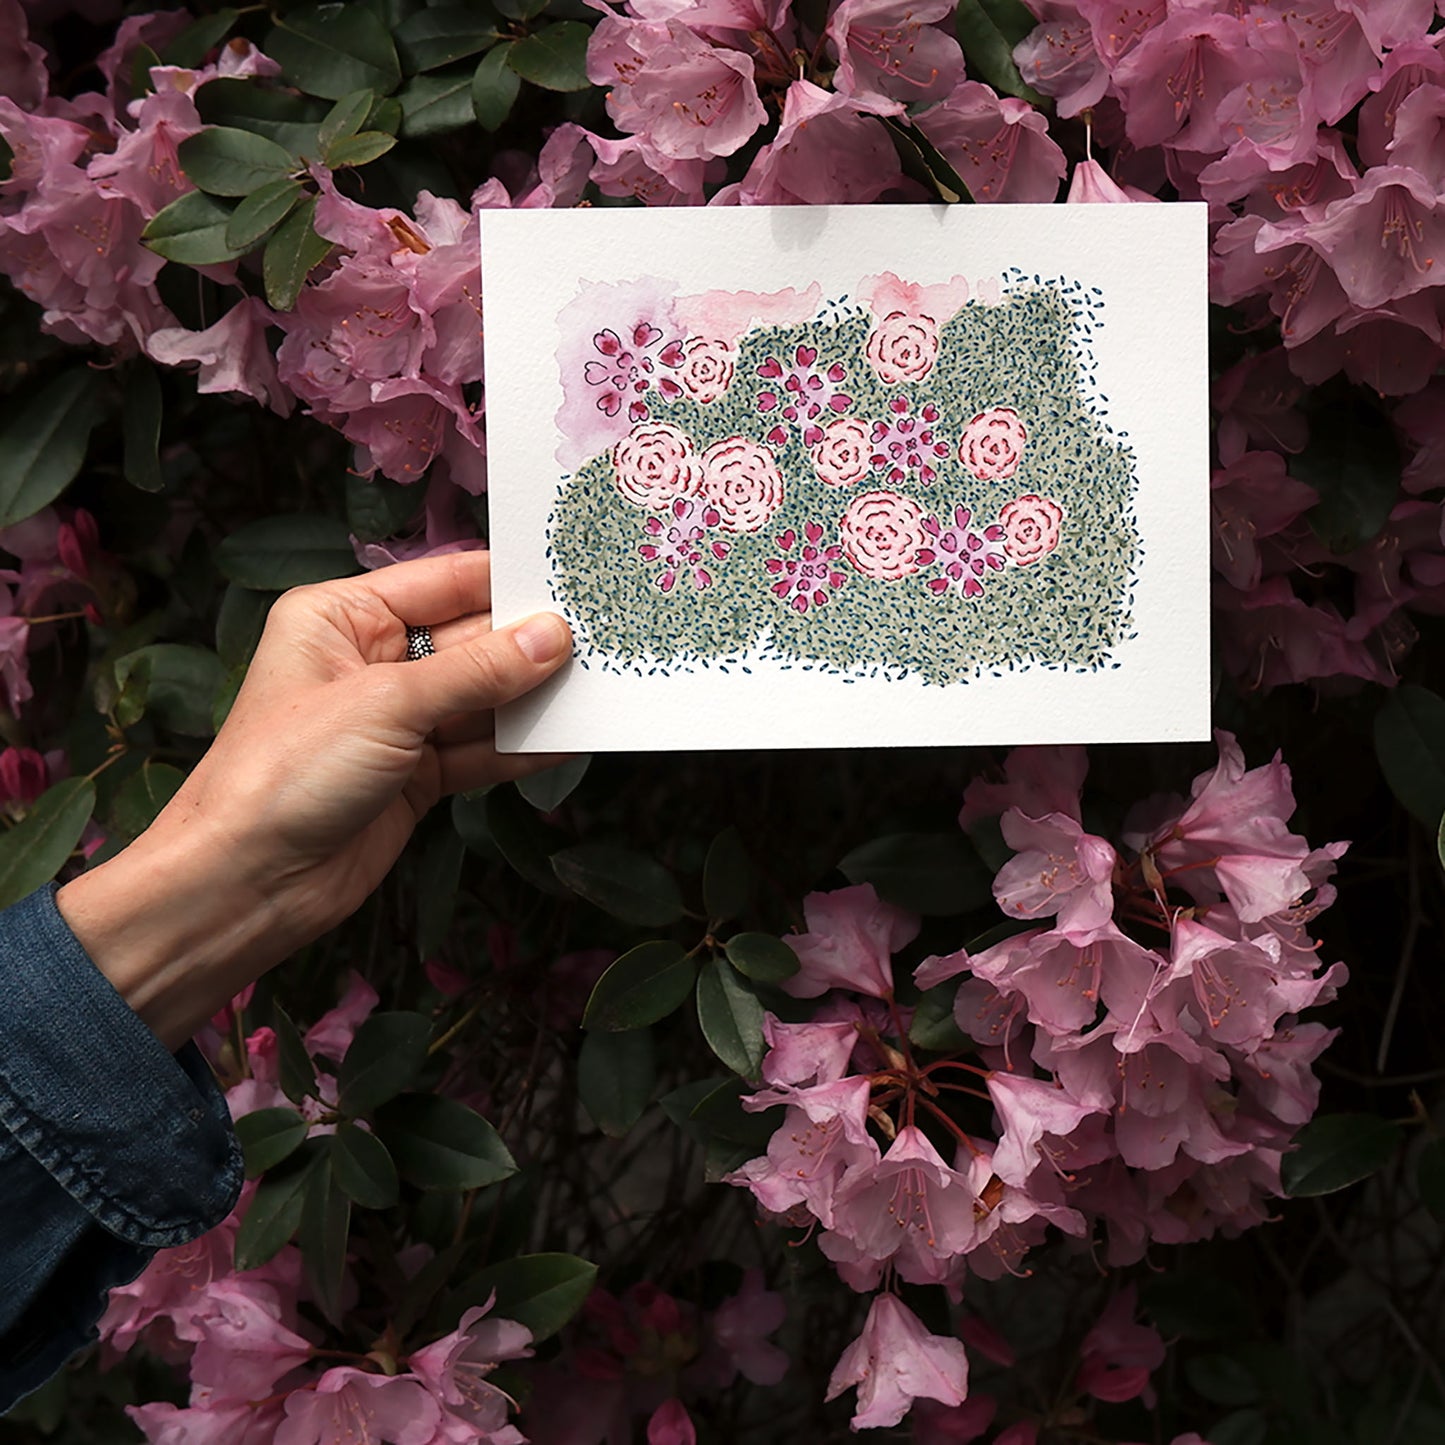 Hand holding floral watercolour painting in a garden in front of pink rhododendron flowers